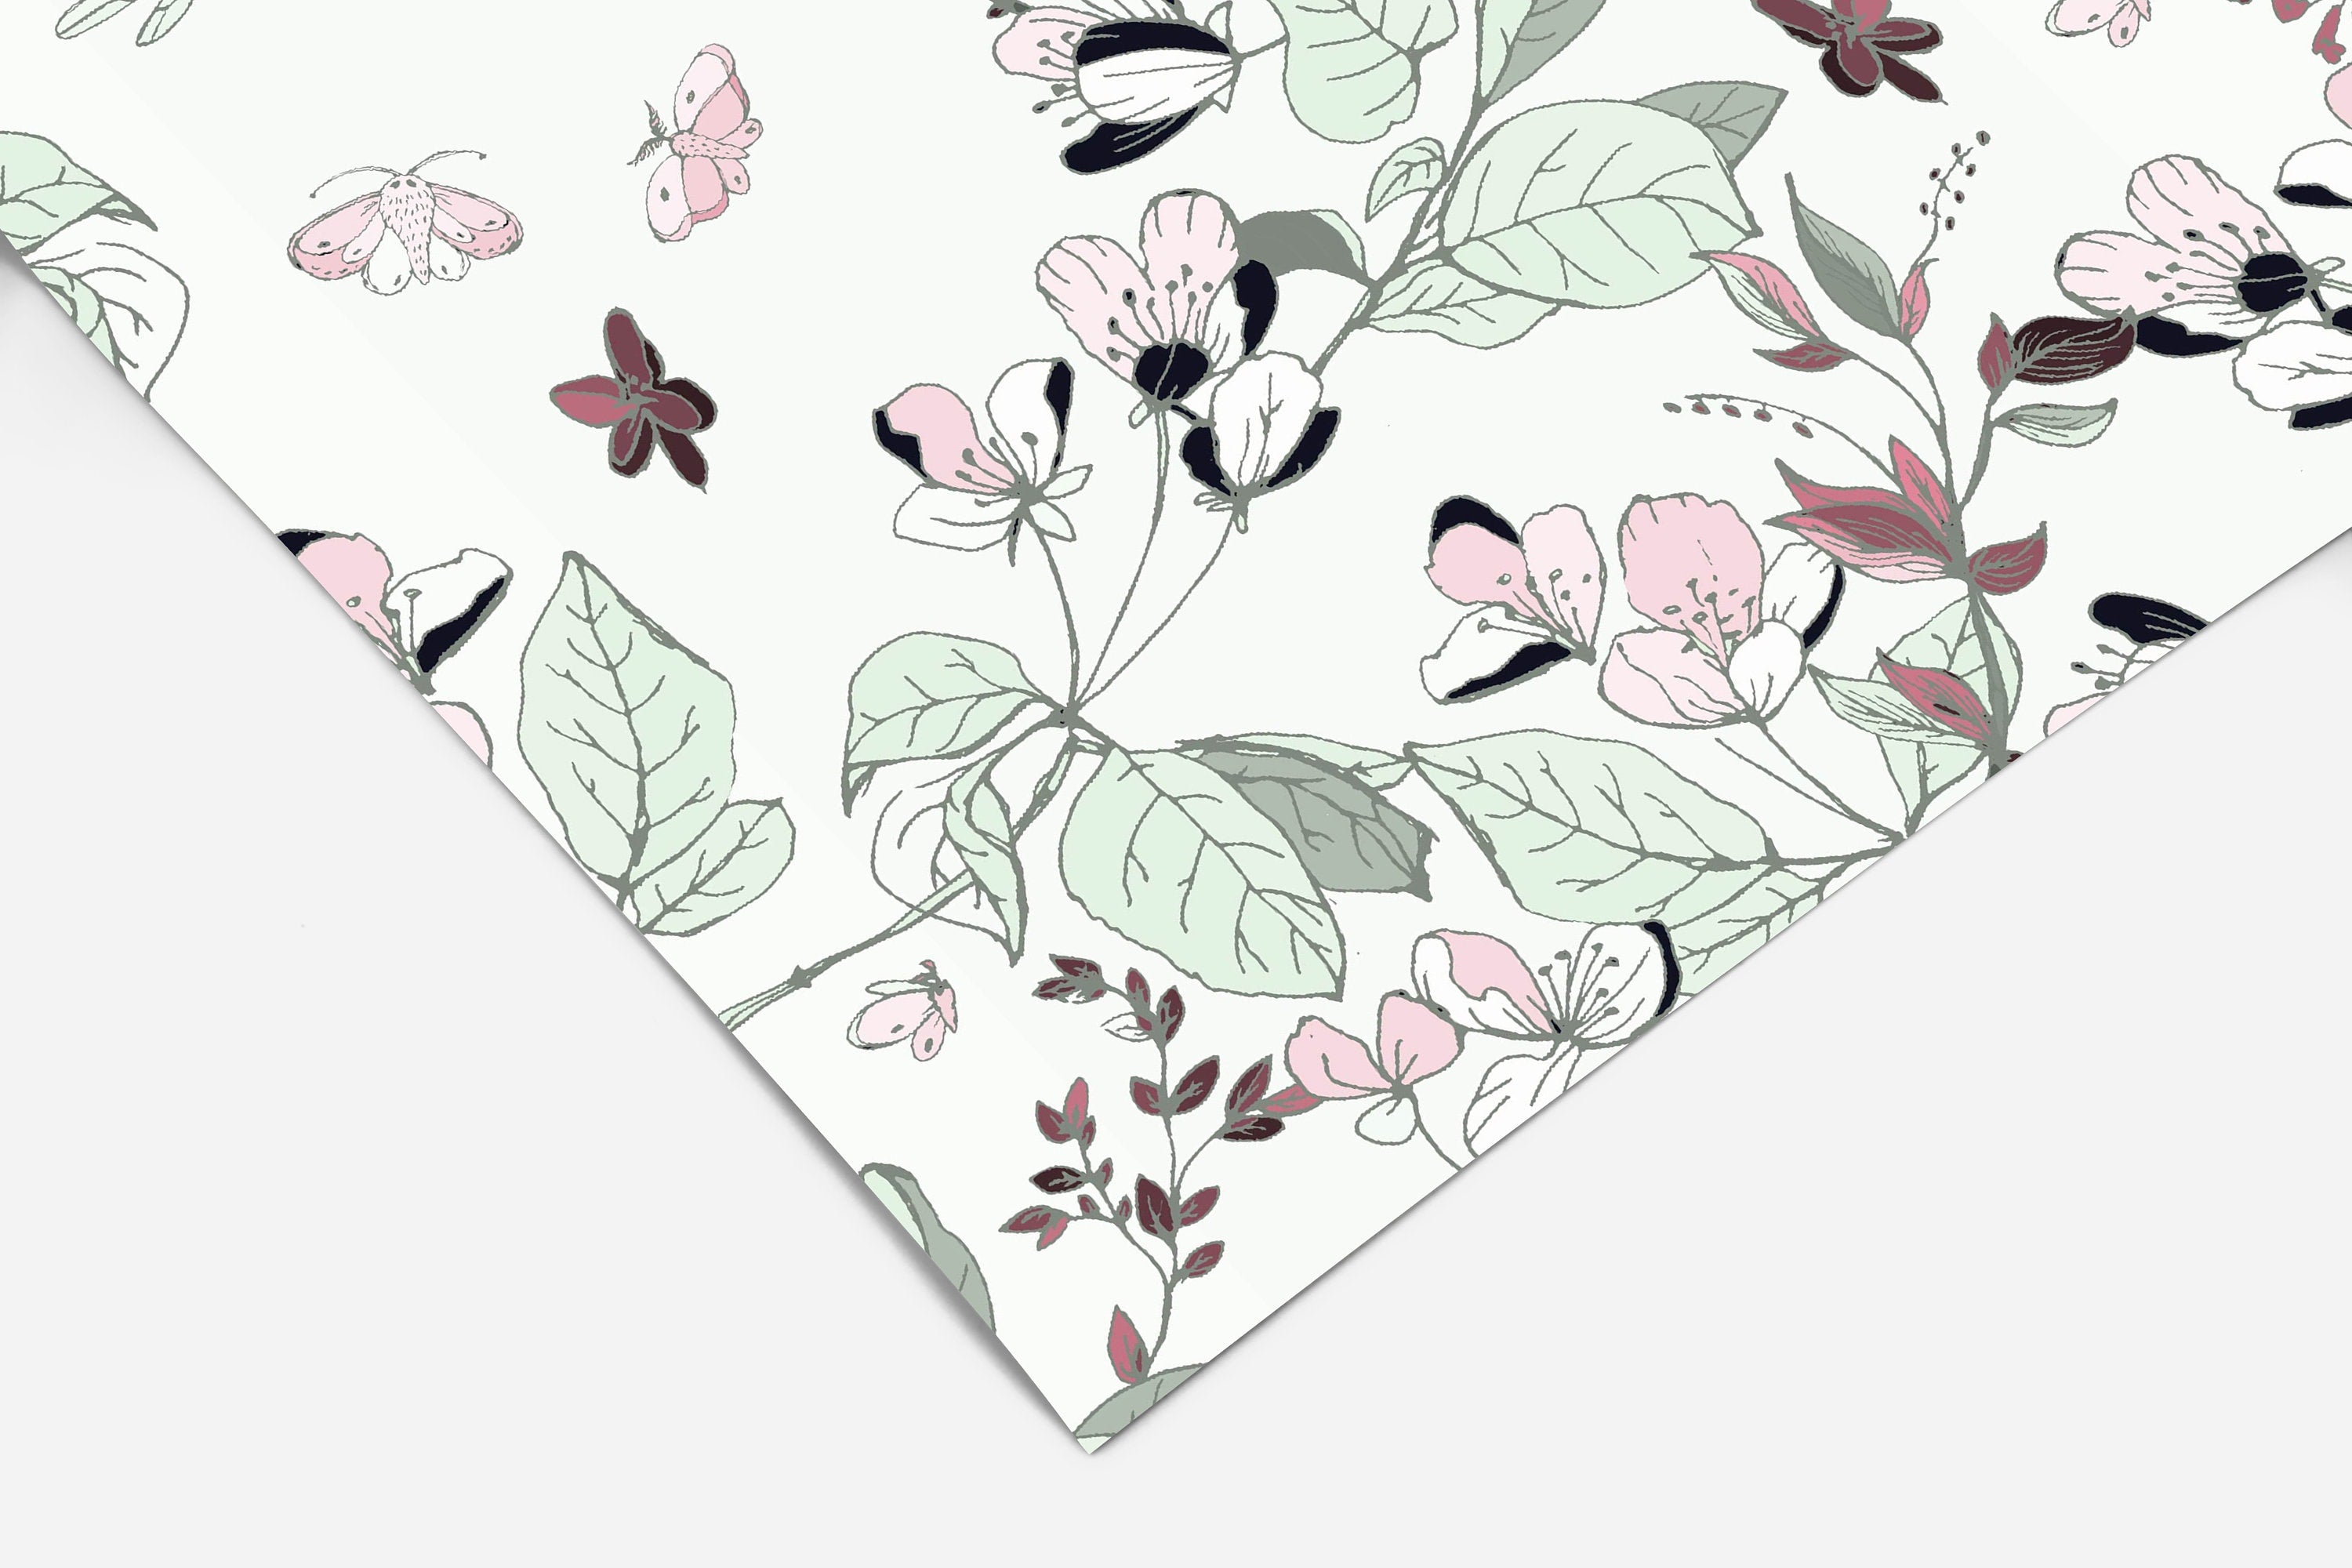 Soft Pink And White Floral Vines Wallpaper | Wallpaper Peel and Stick | Removable Wallpaper | Wall Paper Peel And Stick 3444 - JamesAndColors